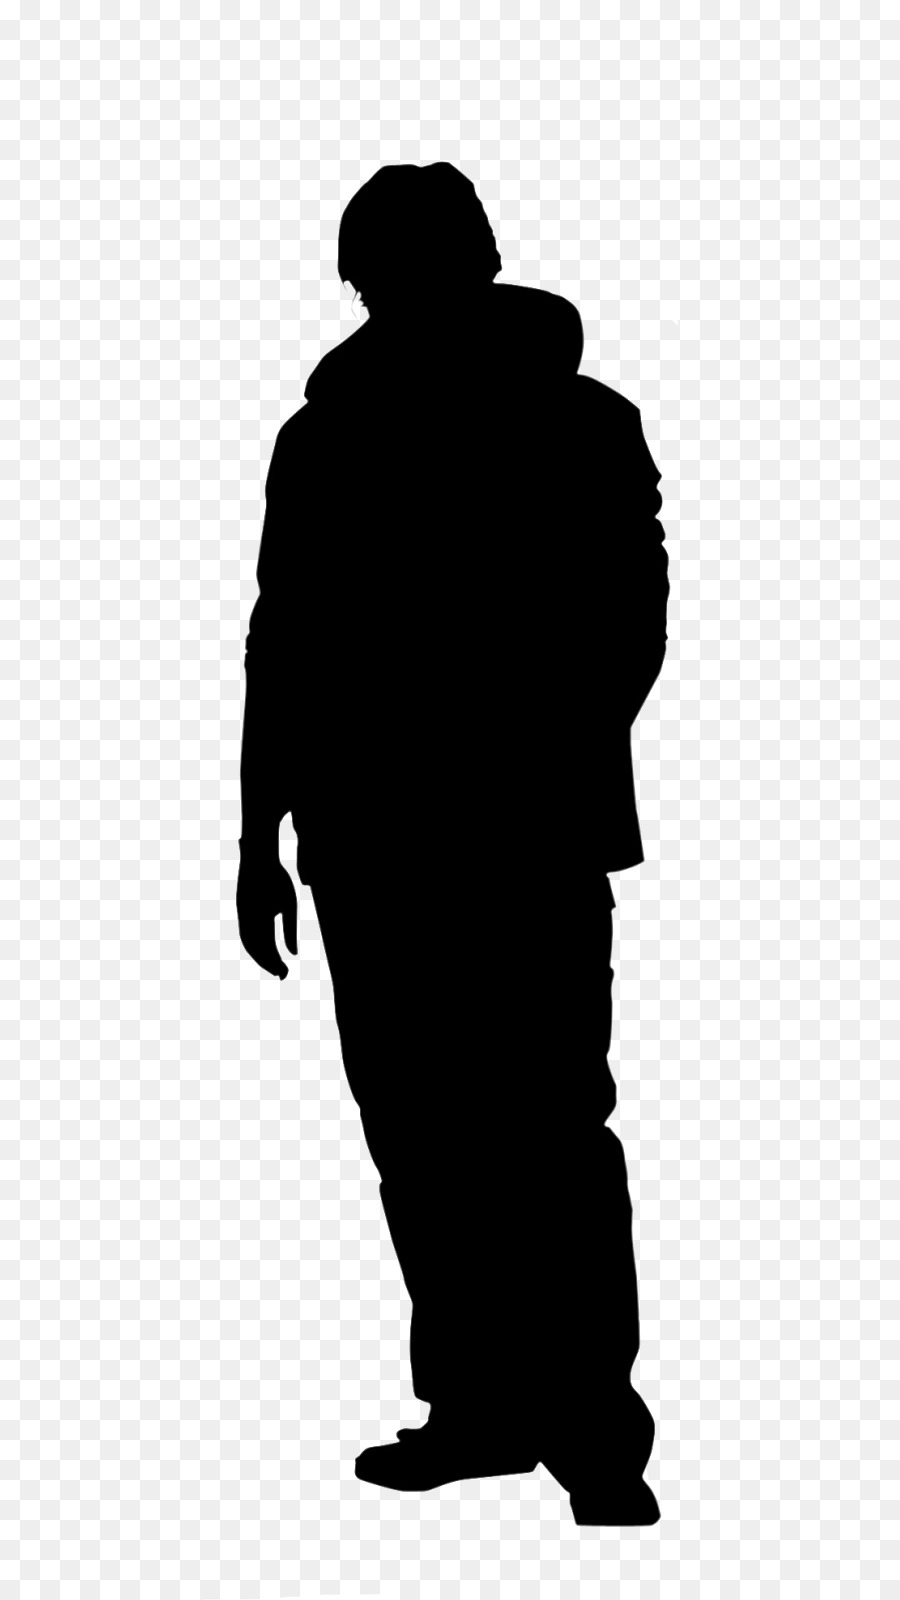 Wife Student Imam Midlife crisis - silhouettes png download - 639*1600 - Free Transparent Wife png Download.